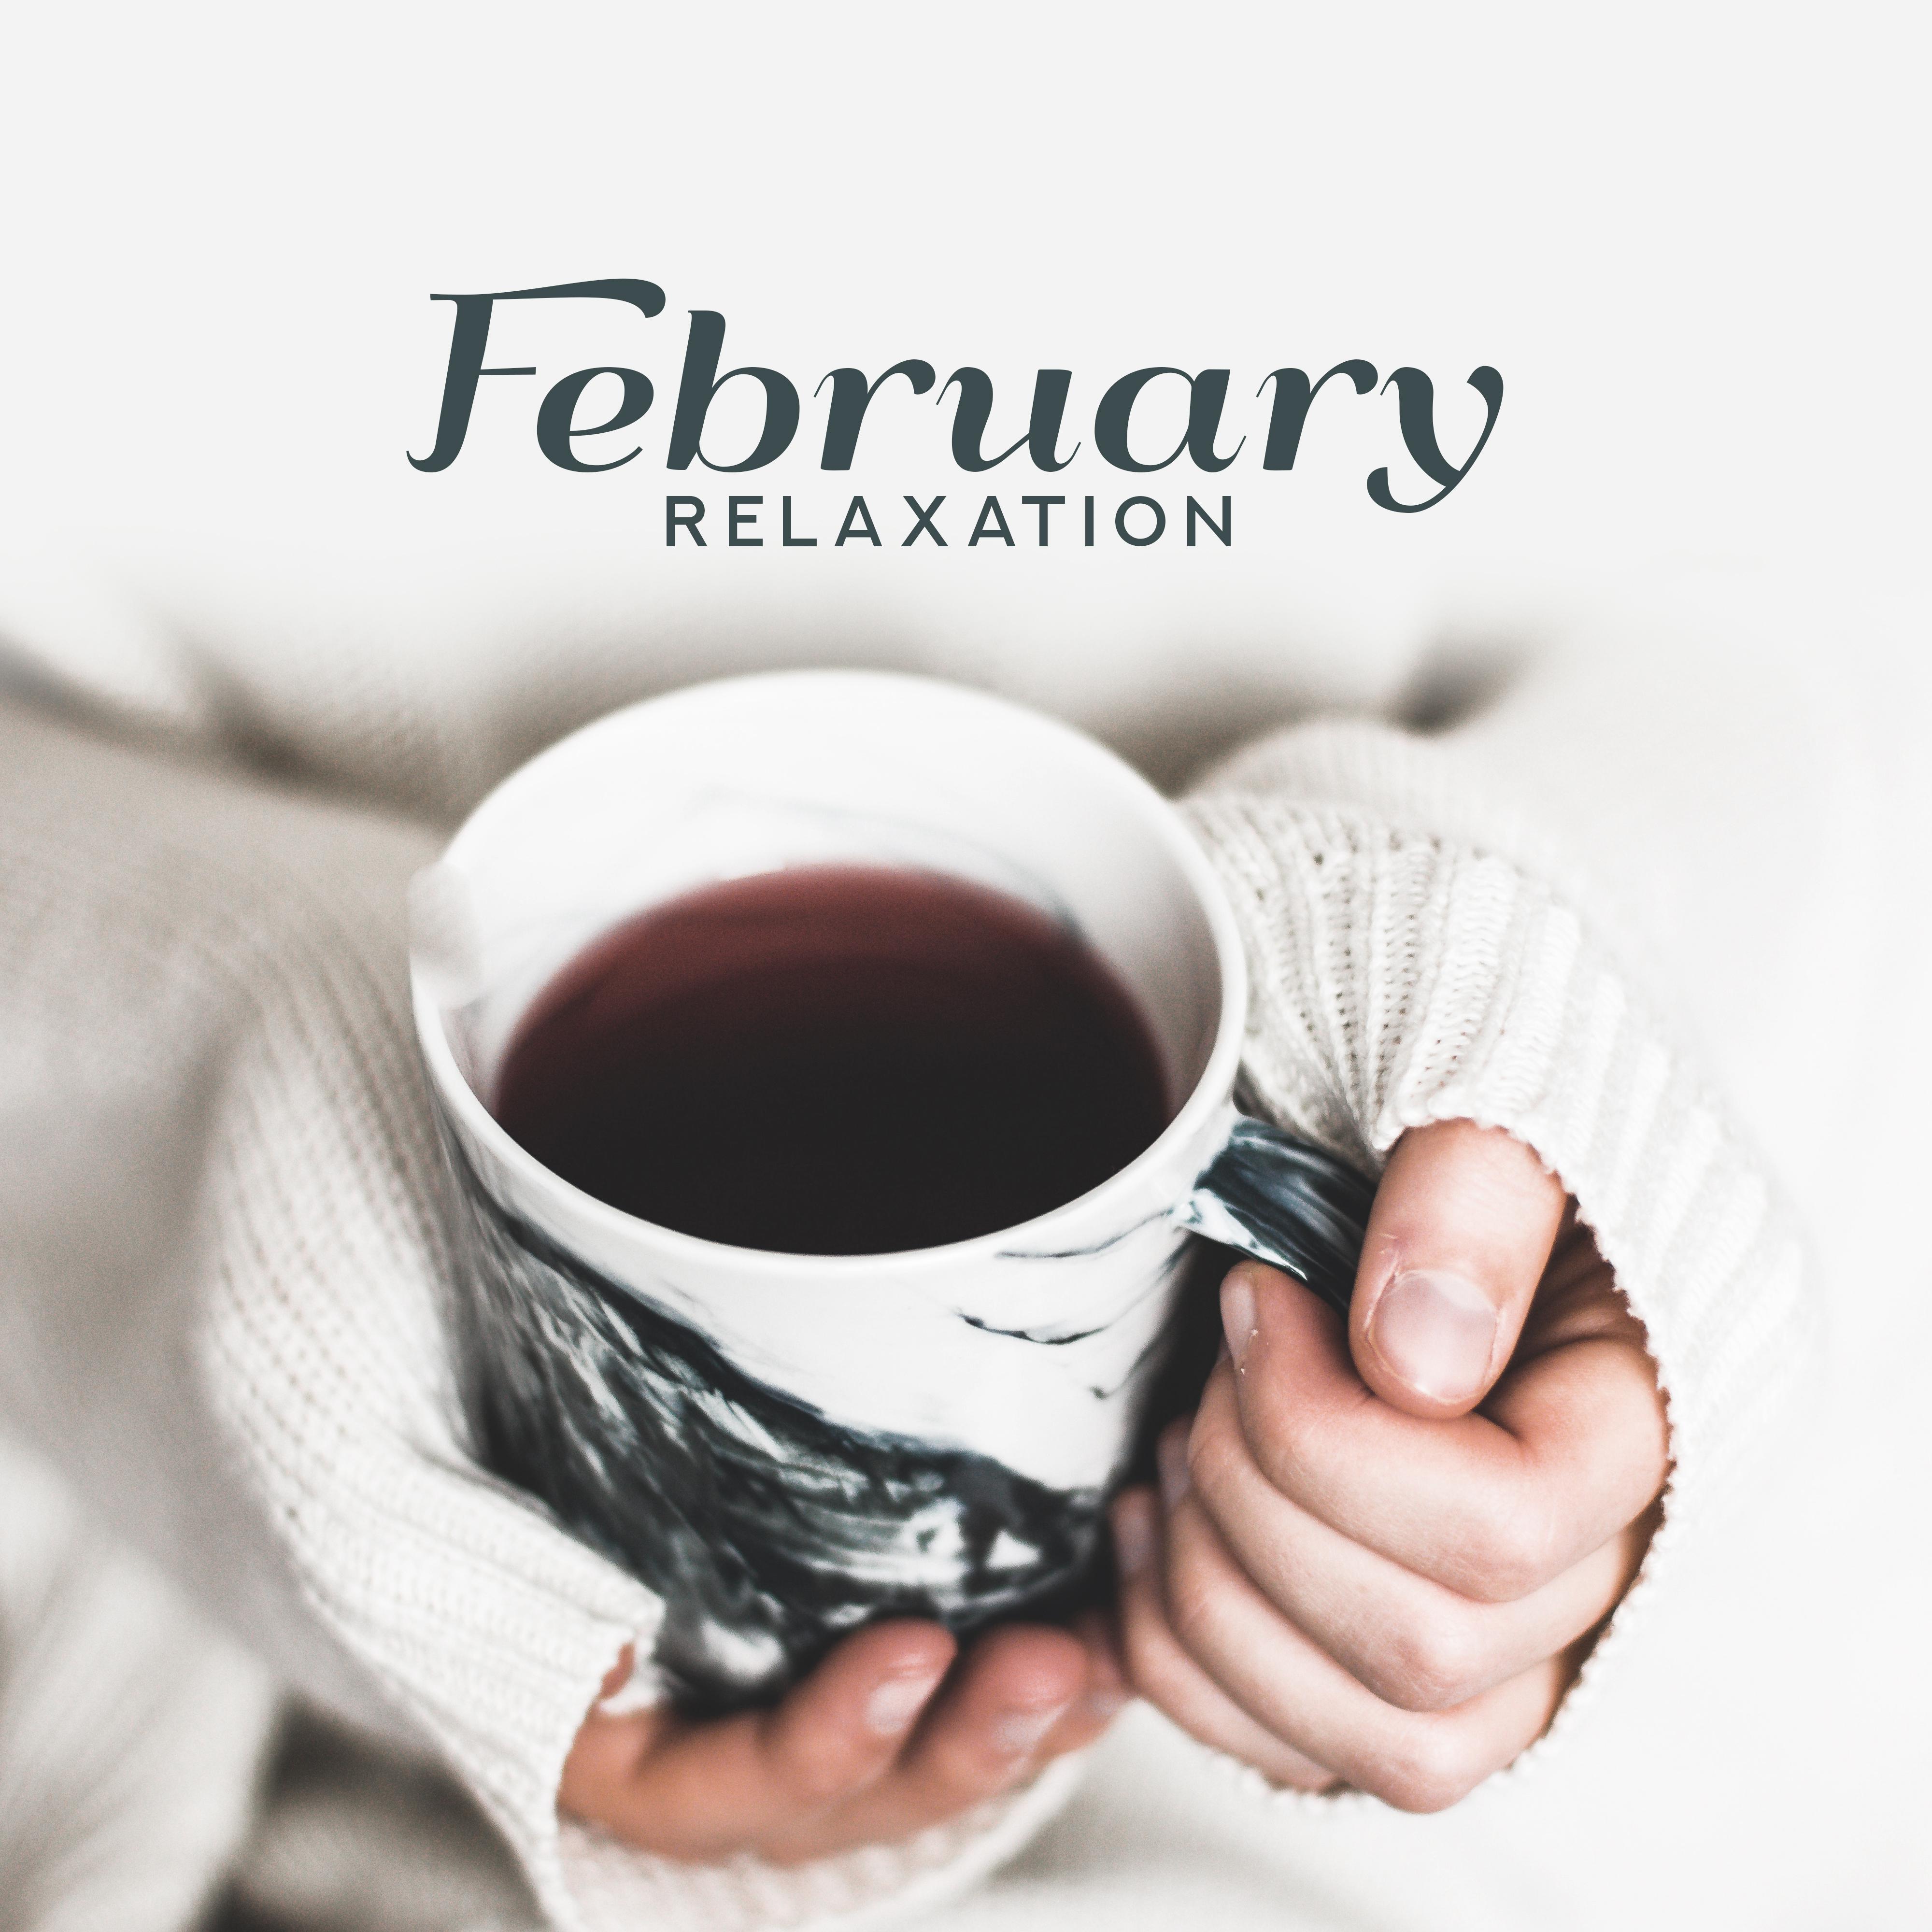 February Relaxation  Chill Out 2019, Smooth Music to Calm Down, Pure Mind, Soothing Chill Out, Zero Stress